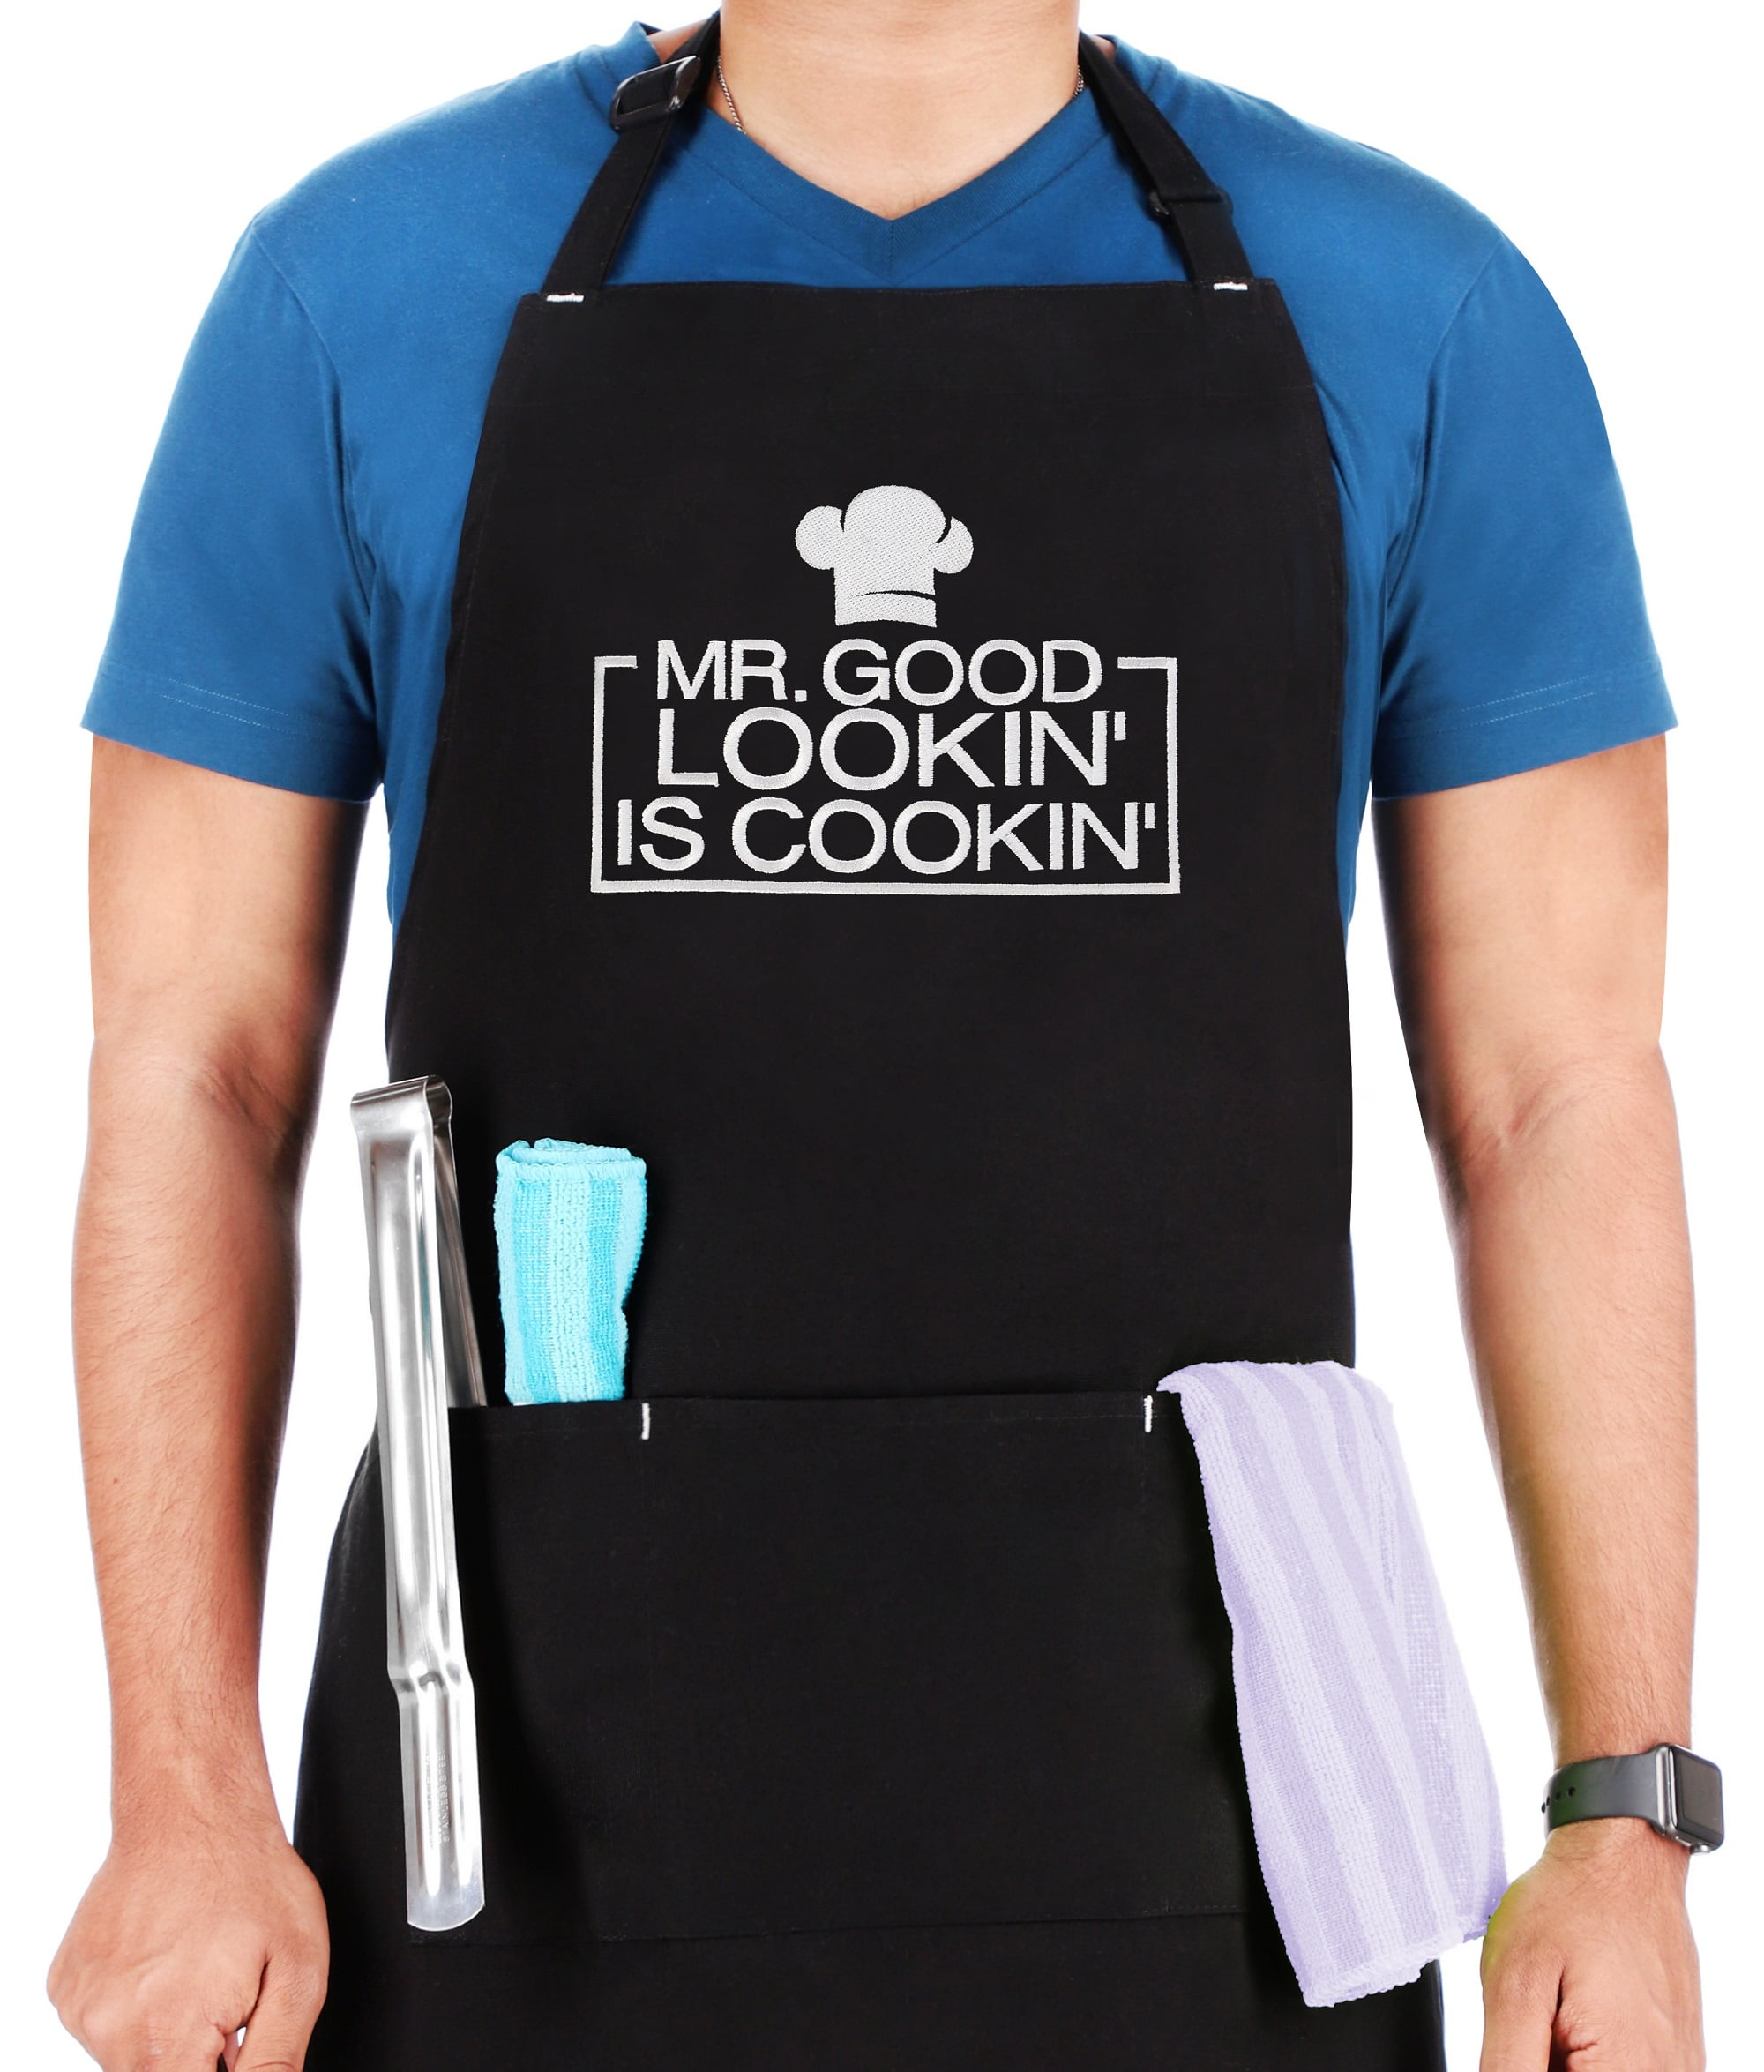 Funny Aprons For Women Are One Size Fits All; This ... Cooking Apron for Women 